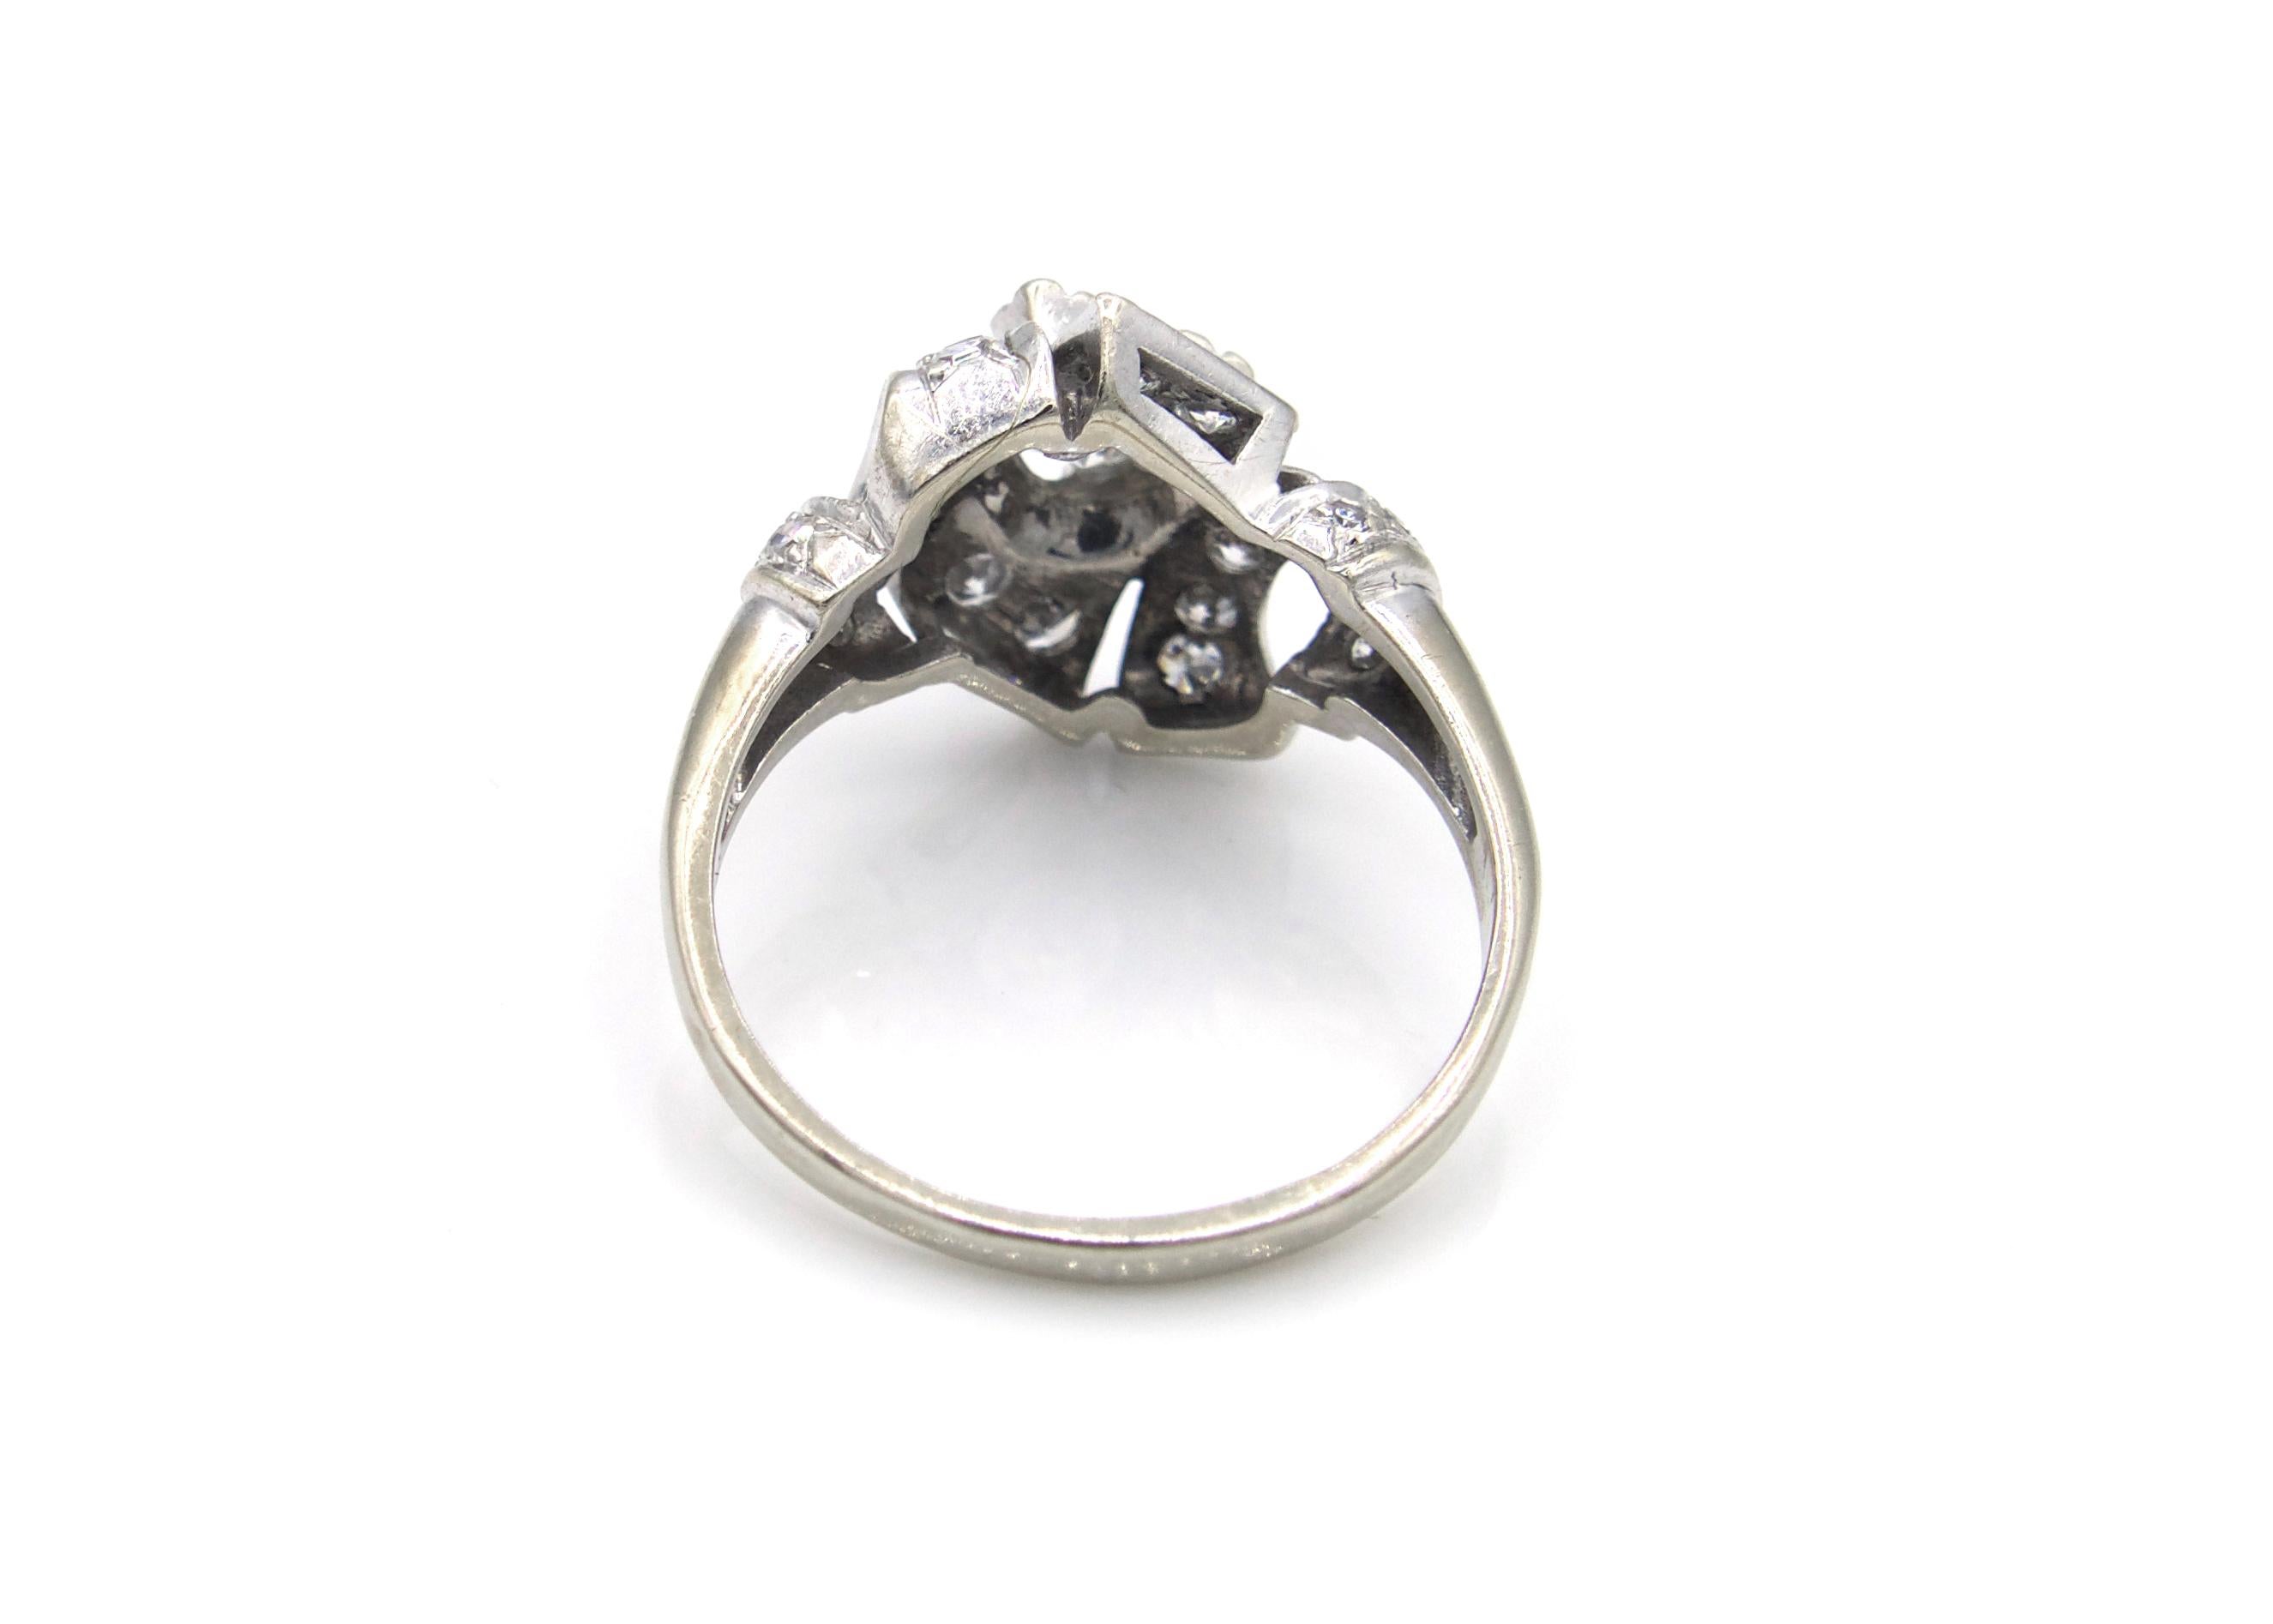 This lovely Art Deco engagement ring is centrally set with a 0.50 Carat center Diamond surrounded by another 0.50 carats of sparkling white diamonds. The 14K White Gold setting has a beautiful ribbon-like shape that surrounds the center stone. 

 